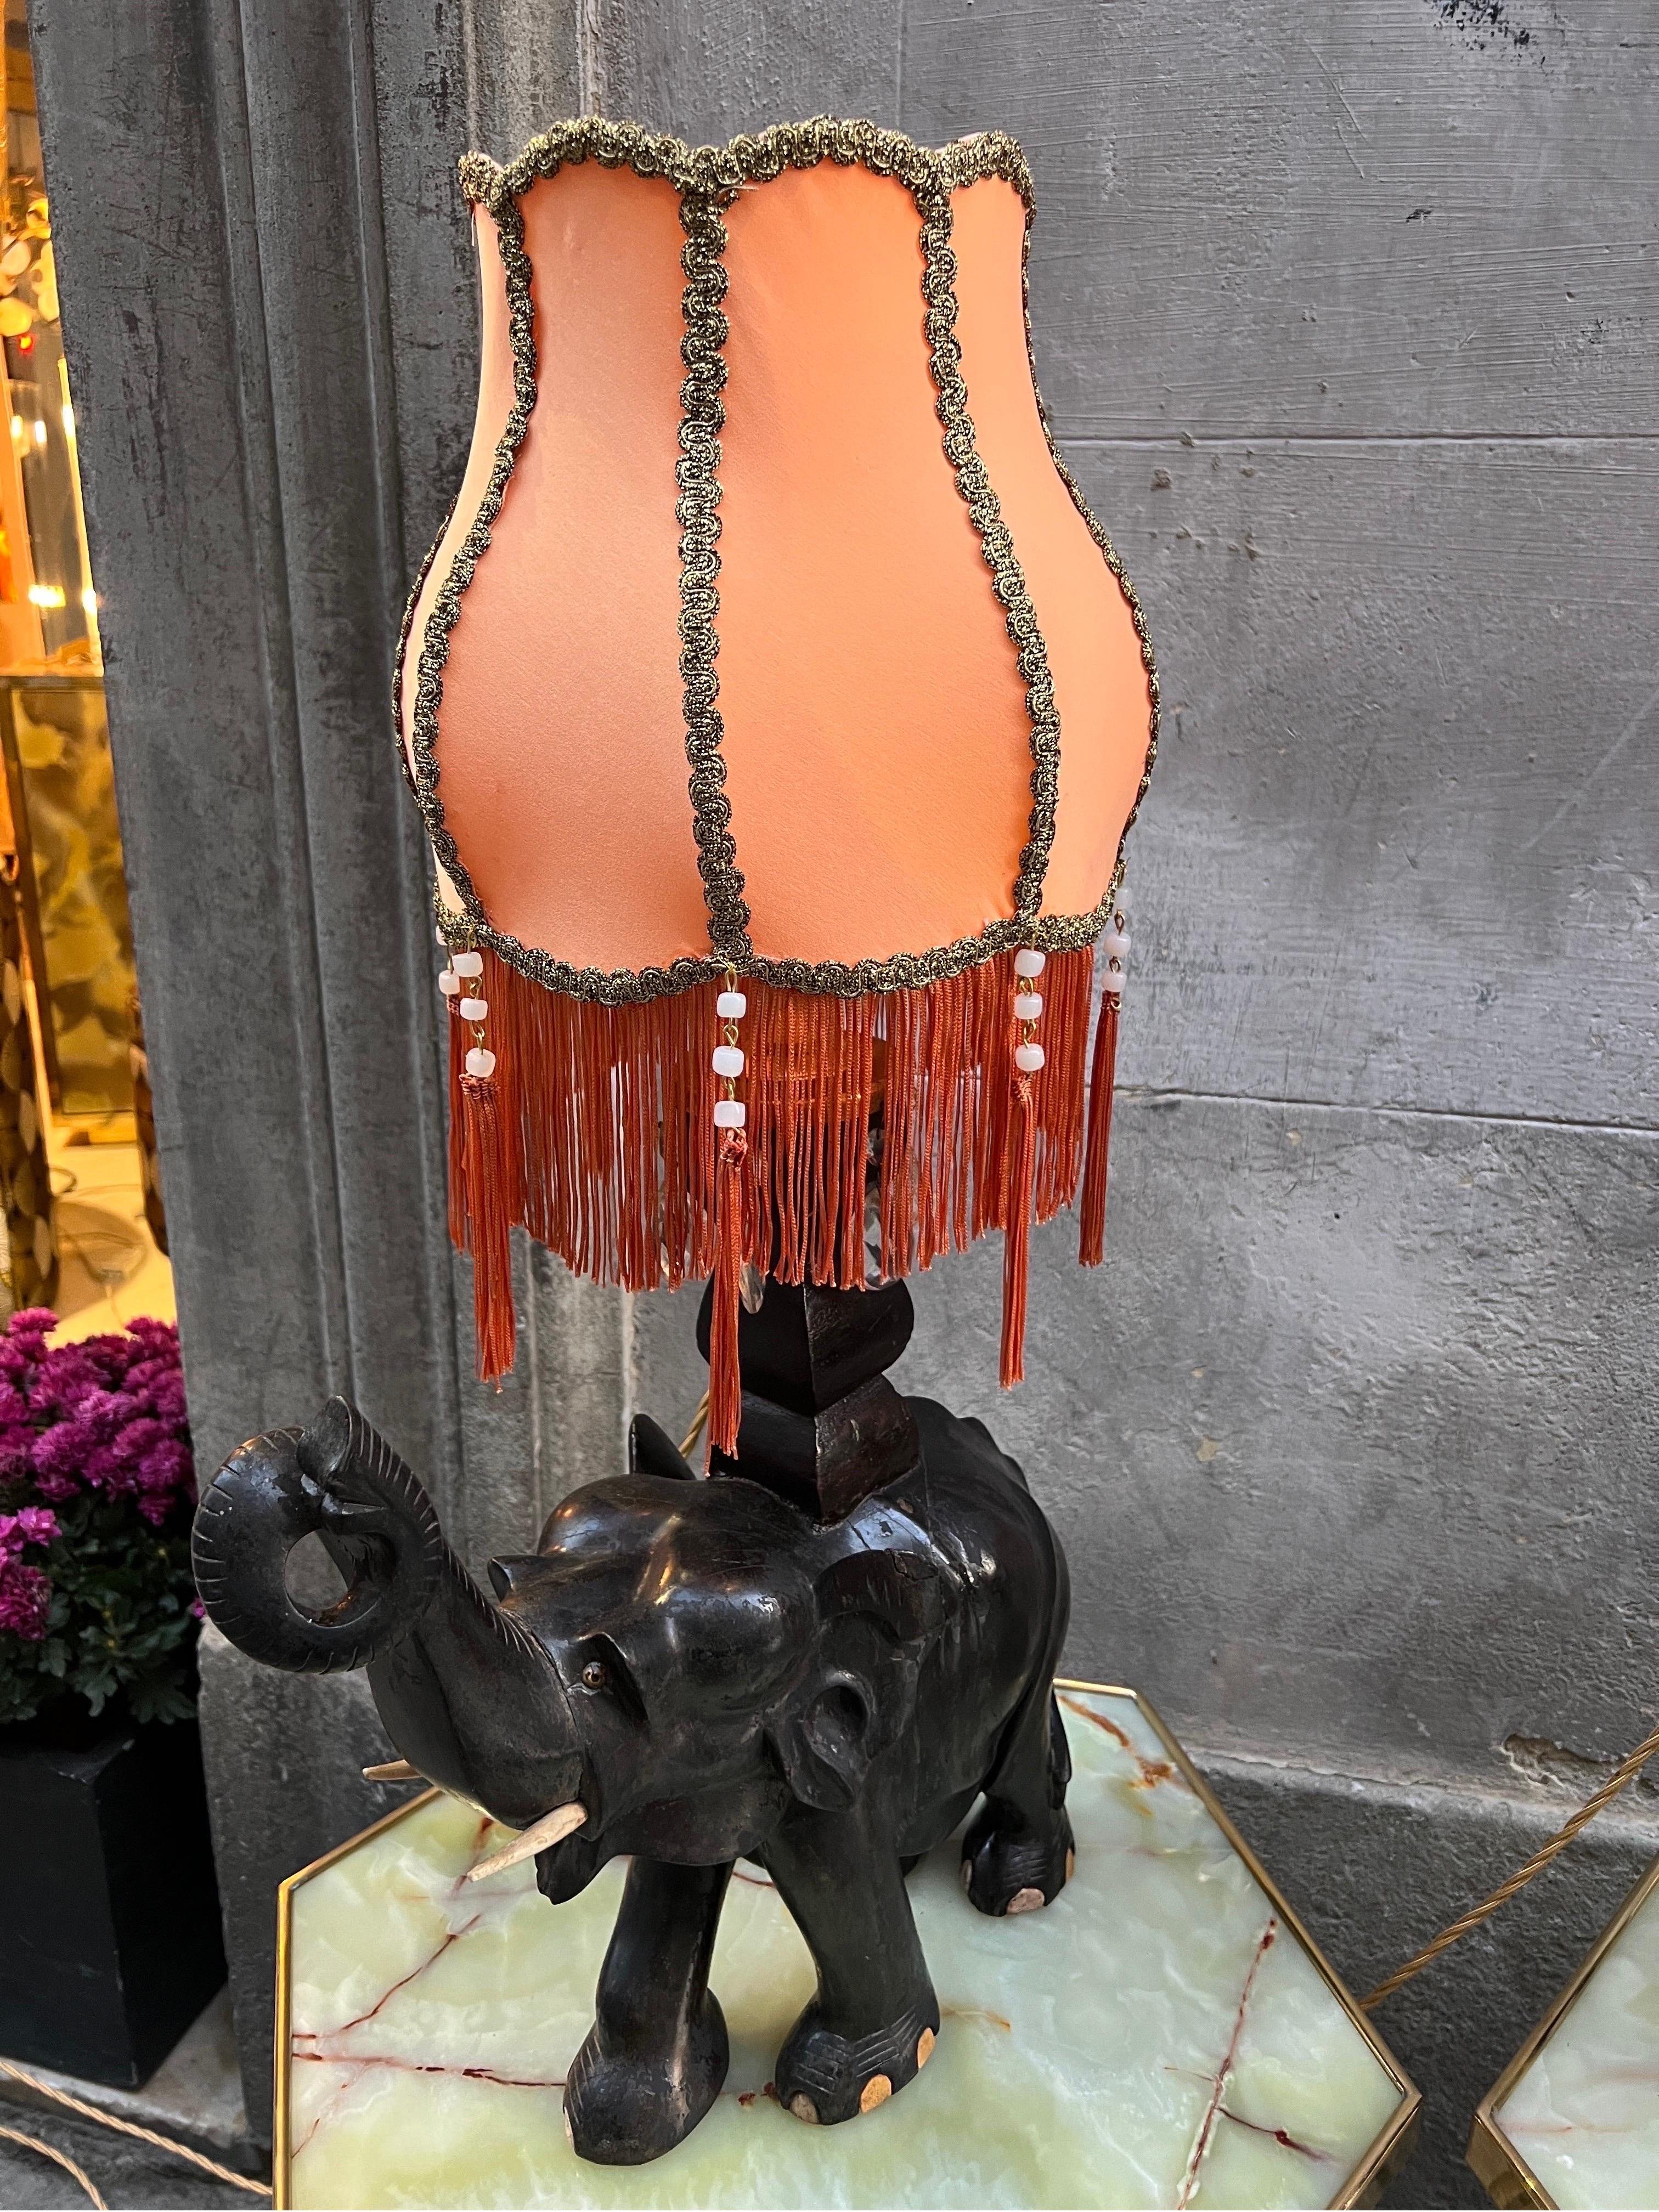 Art Nouveau Pair of Ebony Elephants Table Lamps with Orange Lampshades and Fringes, 1920s